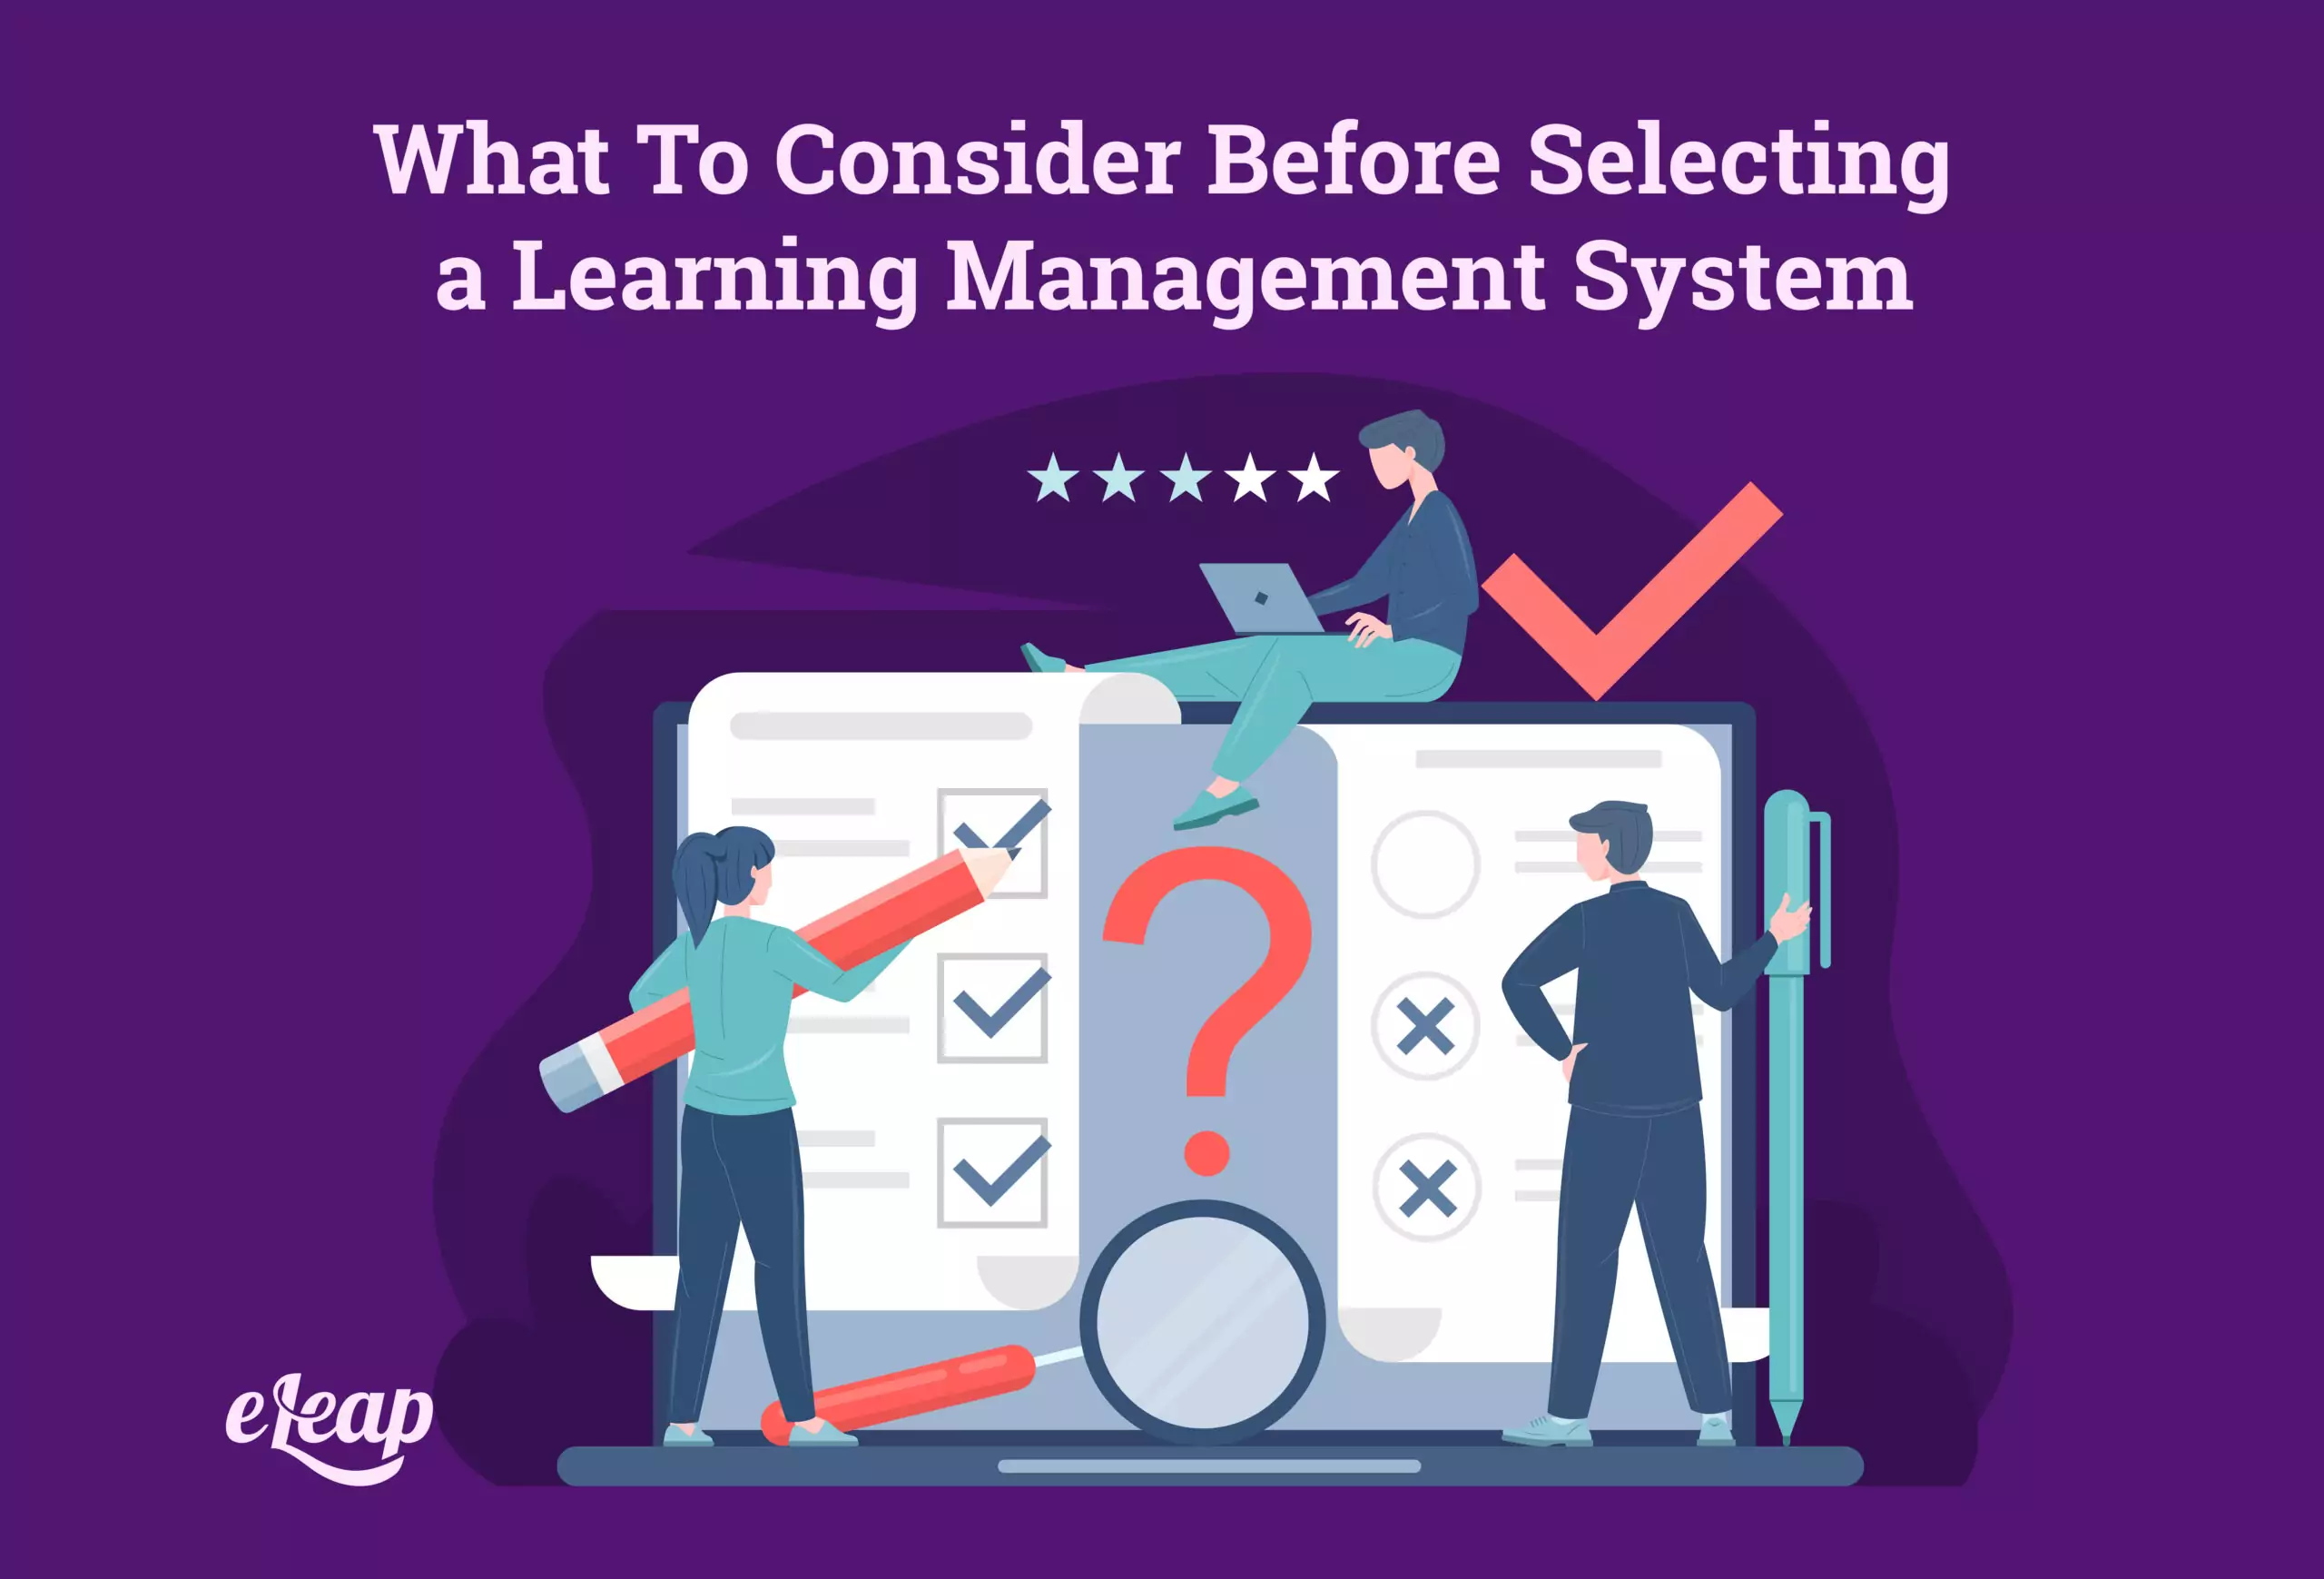 What To Consider Before Selecting a Learning Management System